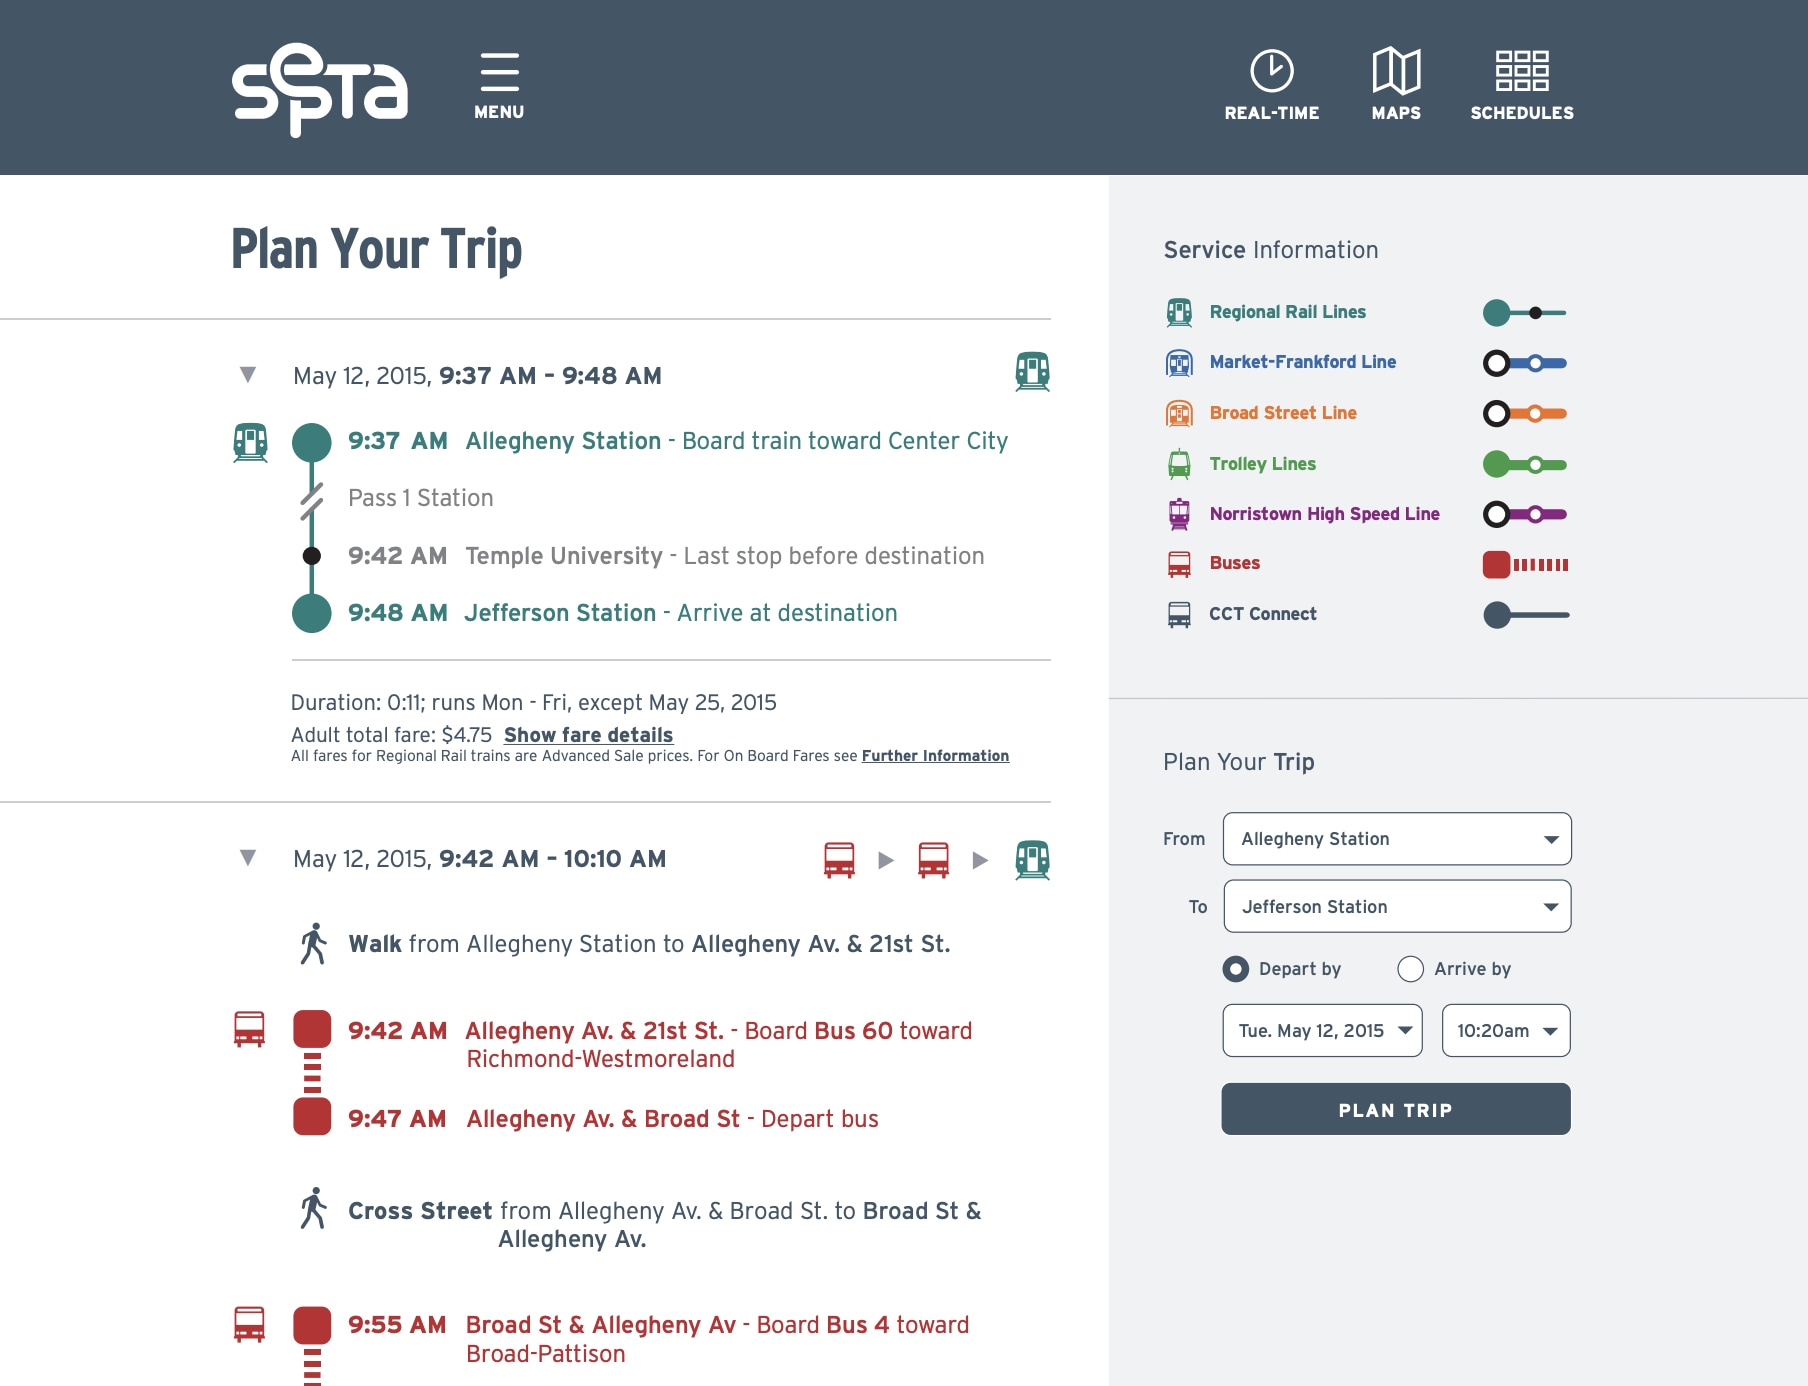 Screenshot of the SEPTA website mockup showing the trip-planning feature.